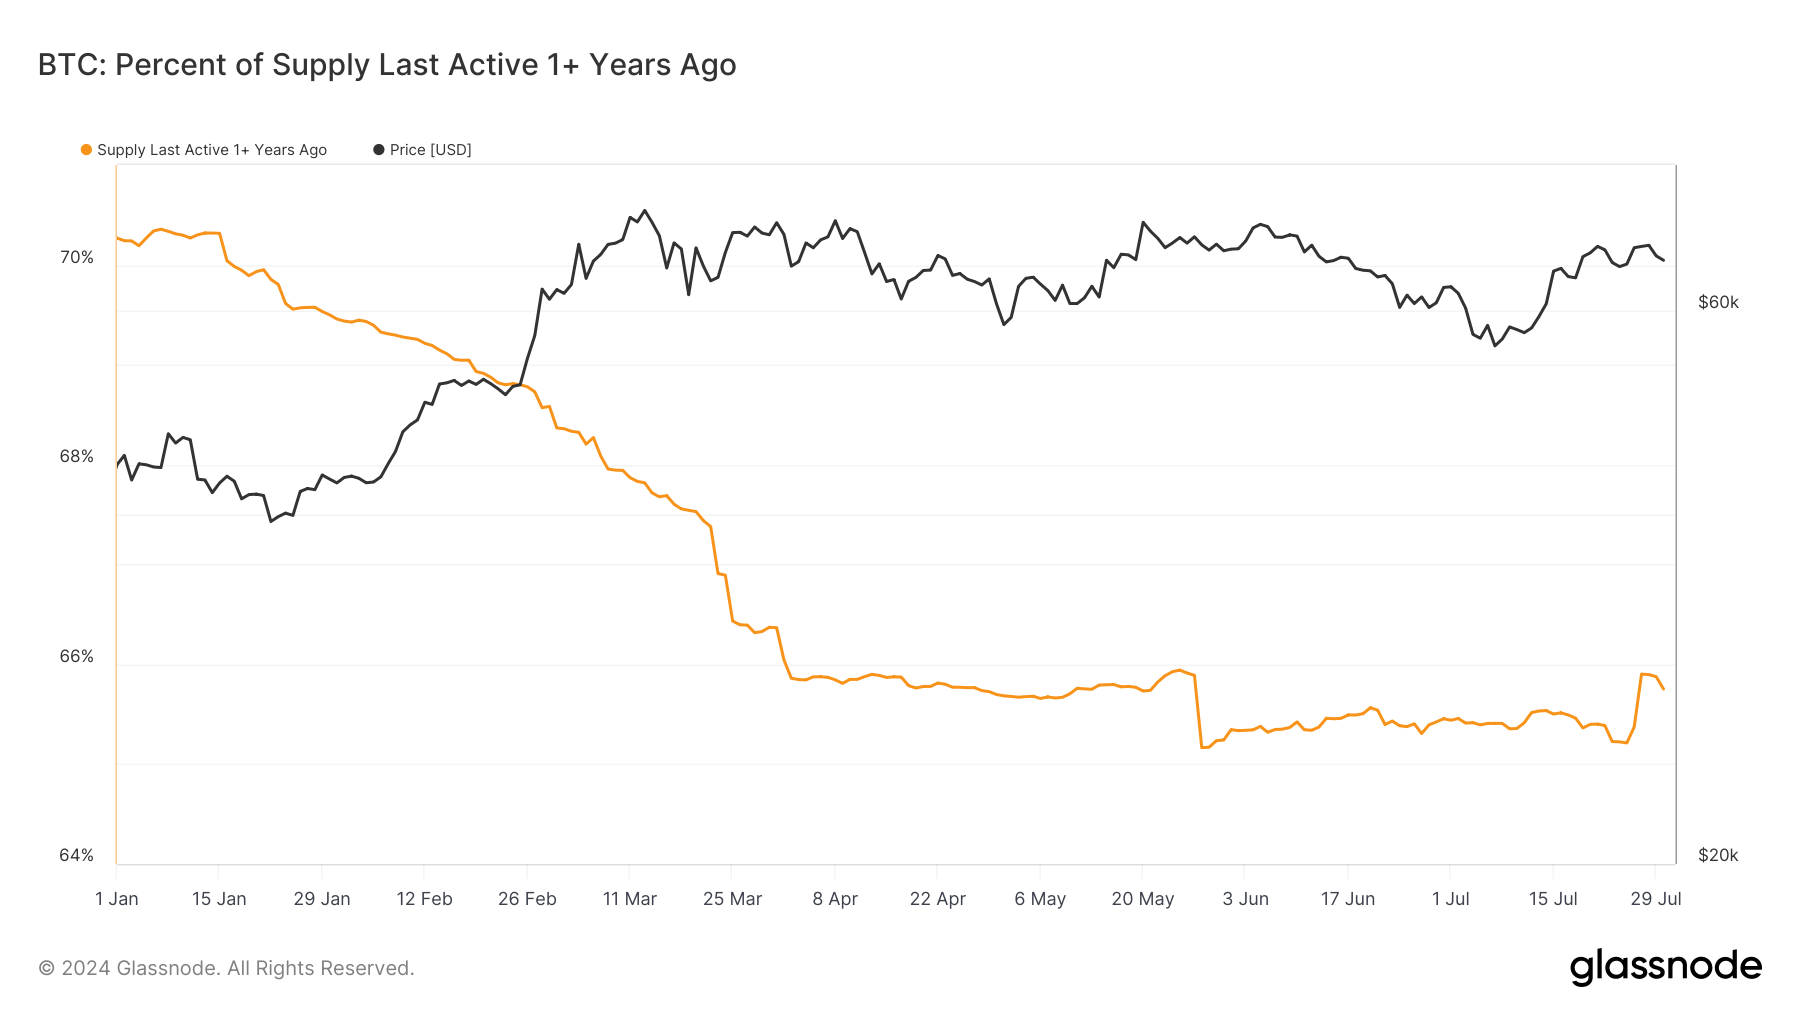 Bitcoin: Percent of Supply Last Active 1+ years ago: (Source: Glassnode)